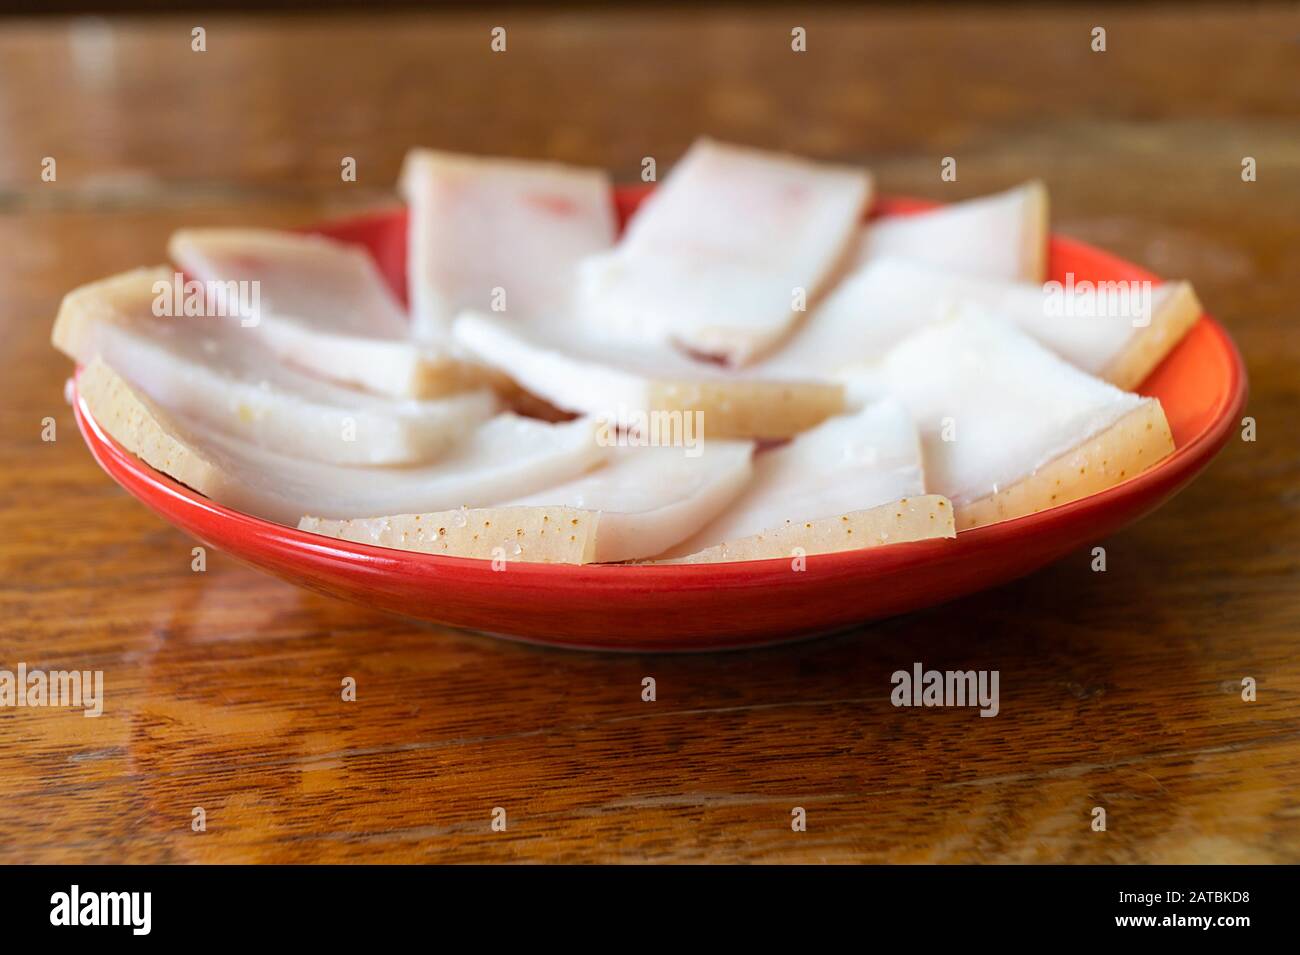 The Bit fat porks on table. The Red plate on wooden table.Salty white slices Stock Photo